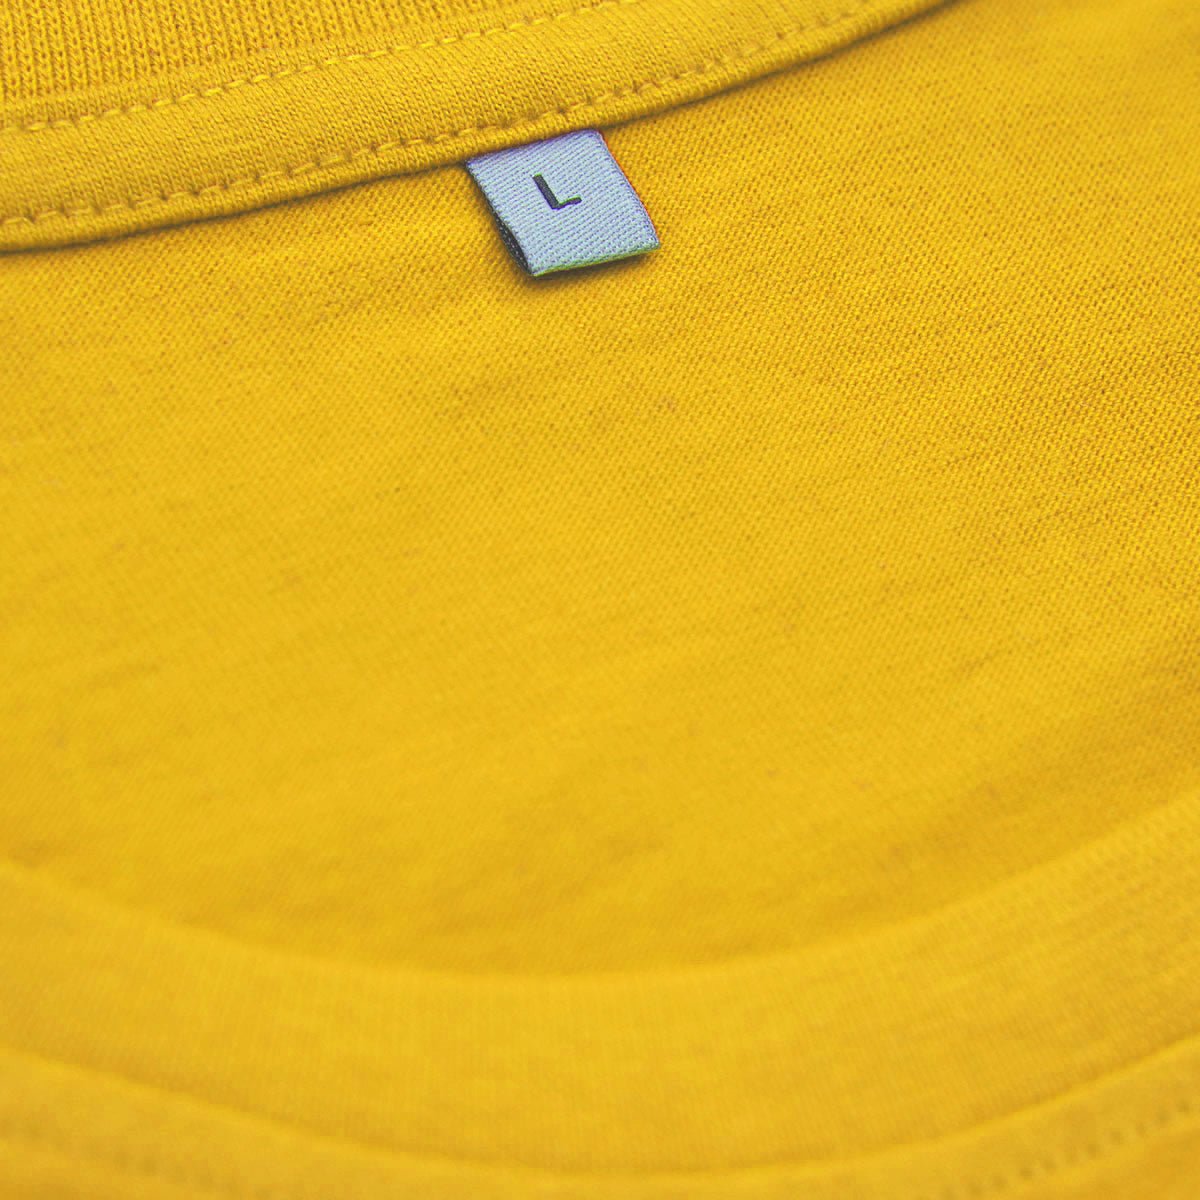 Gold Yellow Tshirt 180 GSM - Gizmoz.in